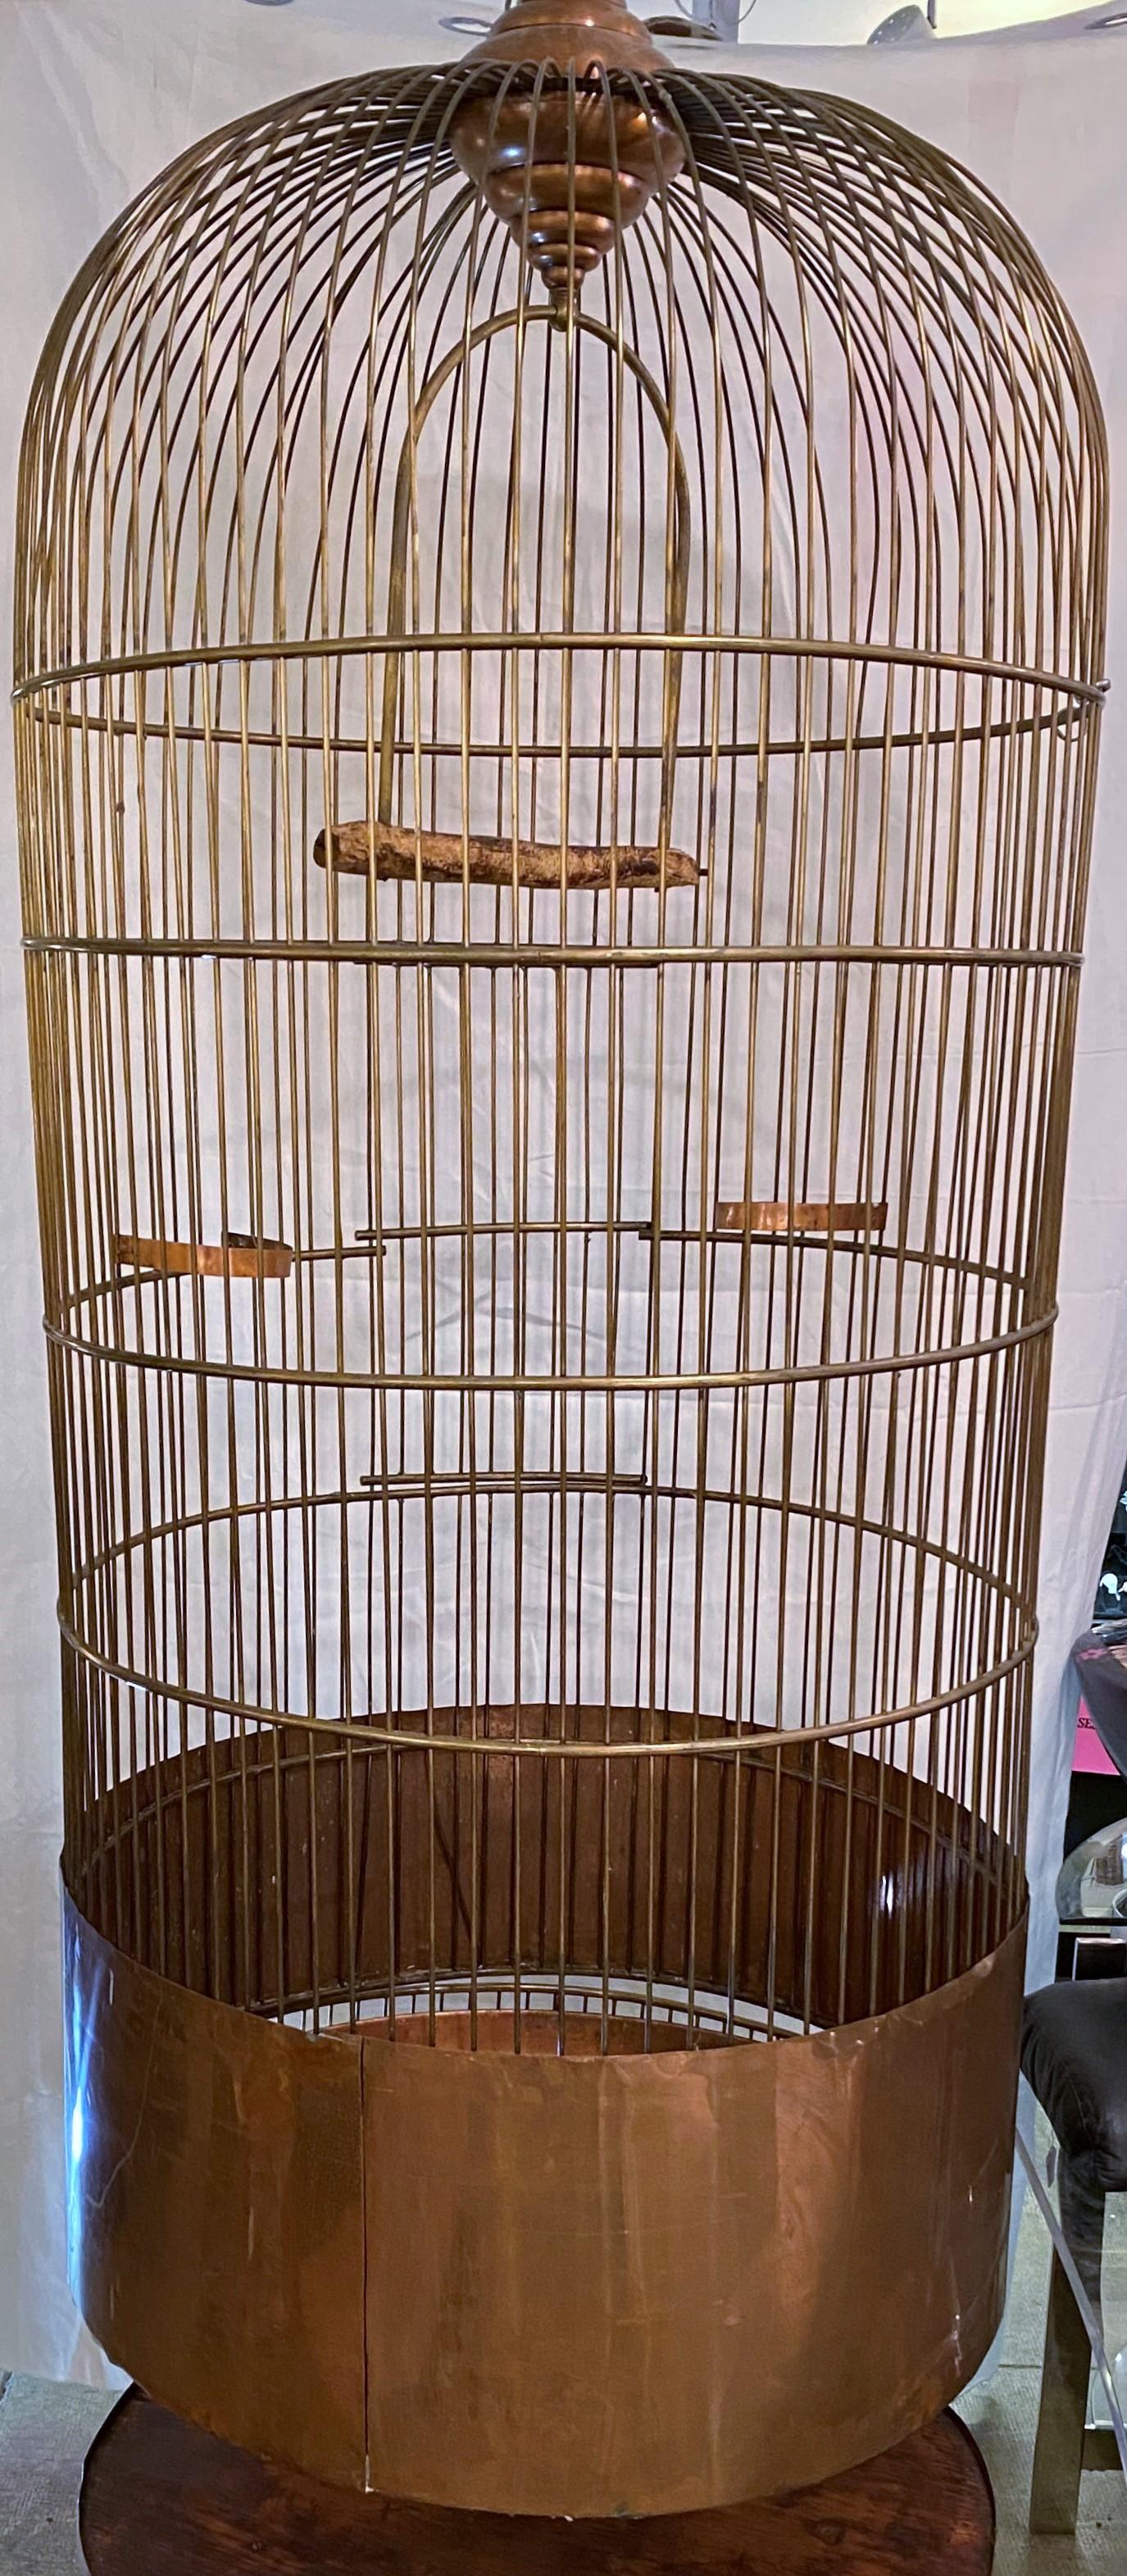 1930s monumental copper bird cage with copper stand

cage is 65 inches high
stand is 13.5 inches high 
full diameter for both is 31 inches.